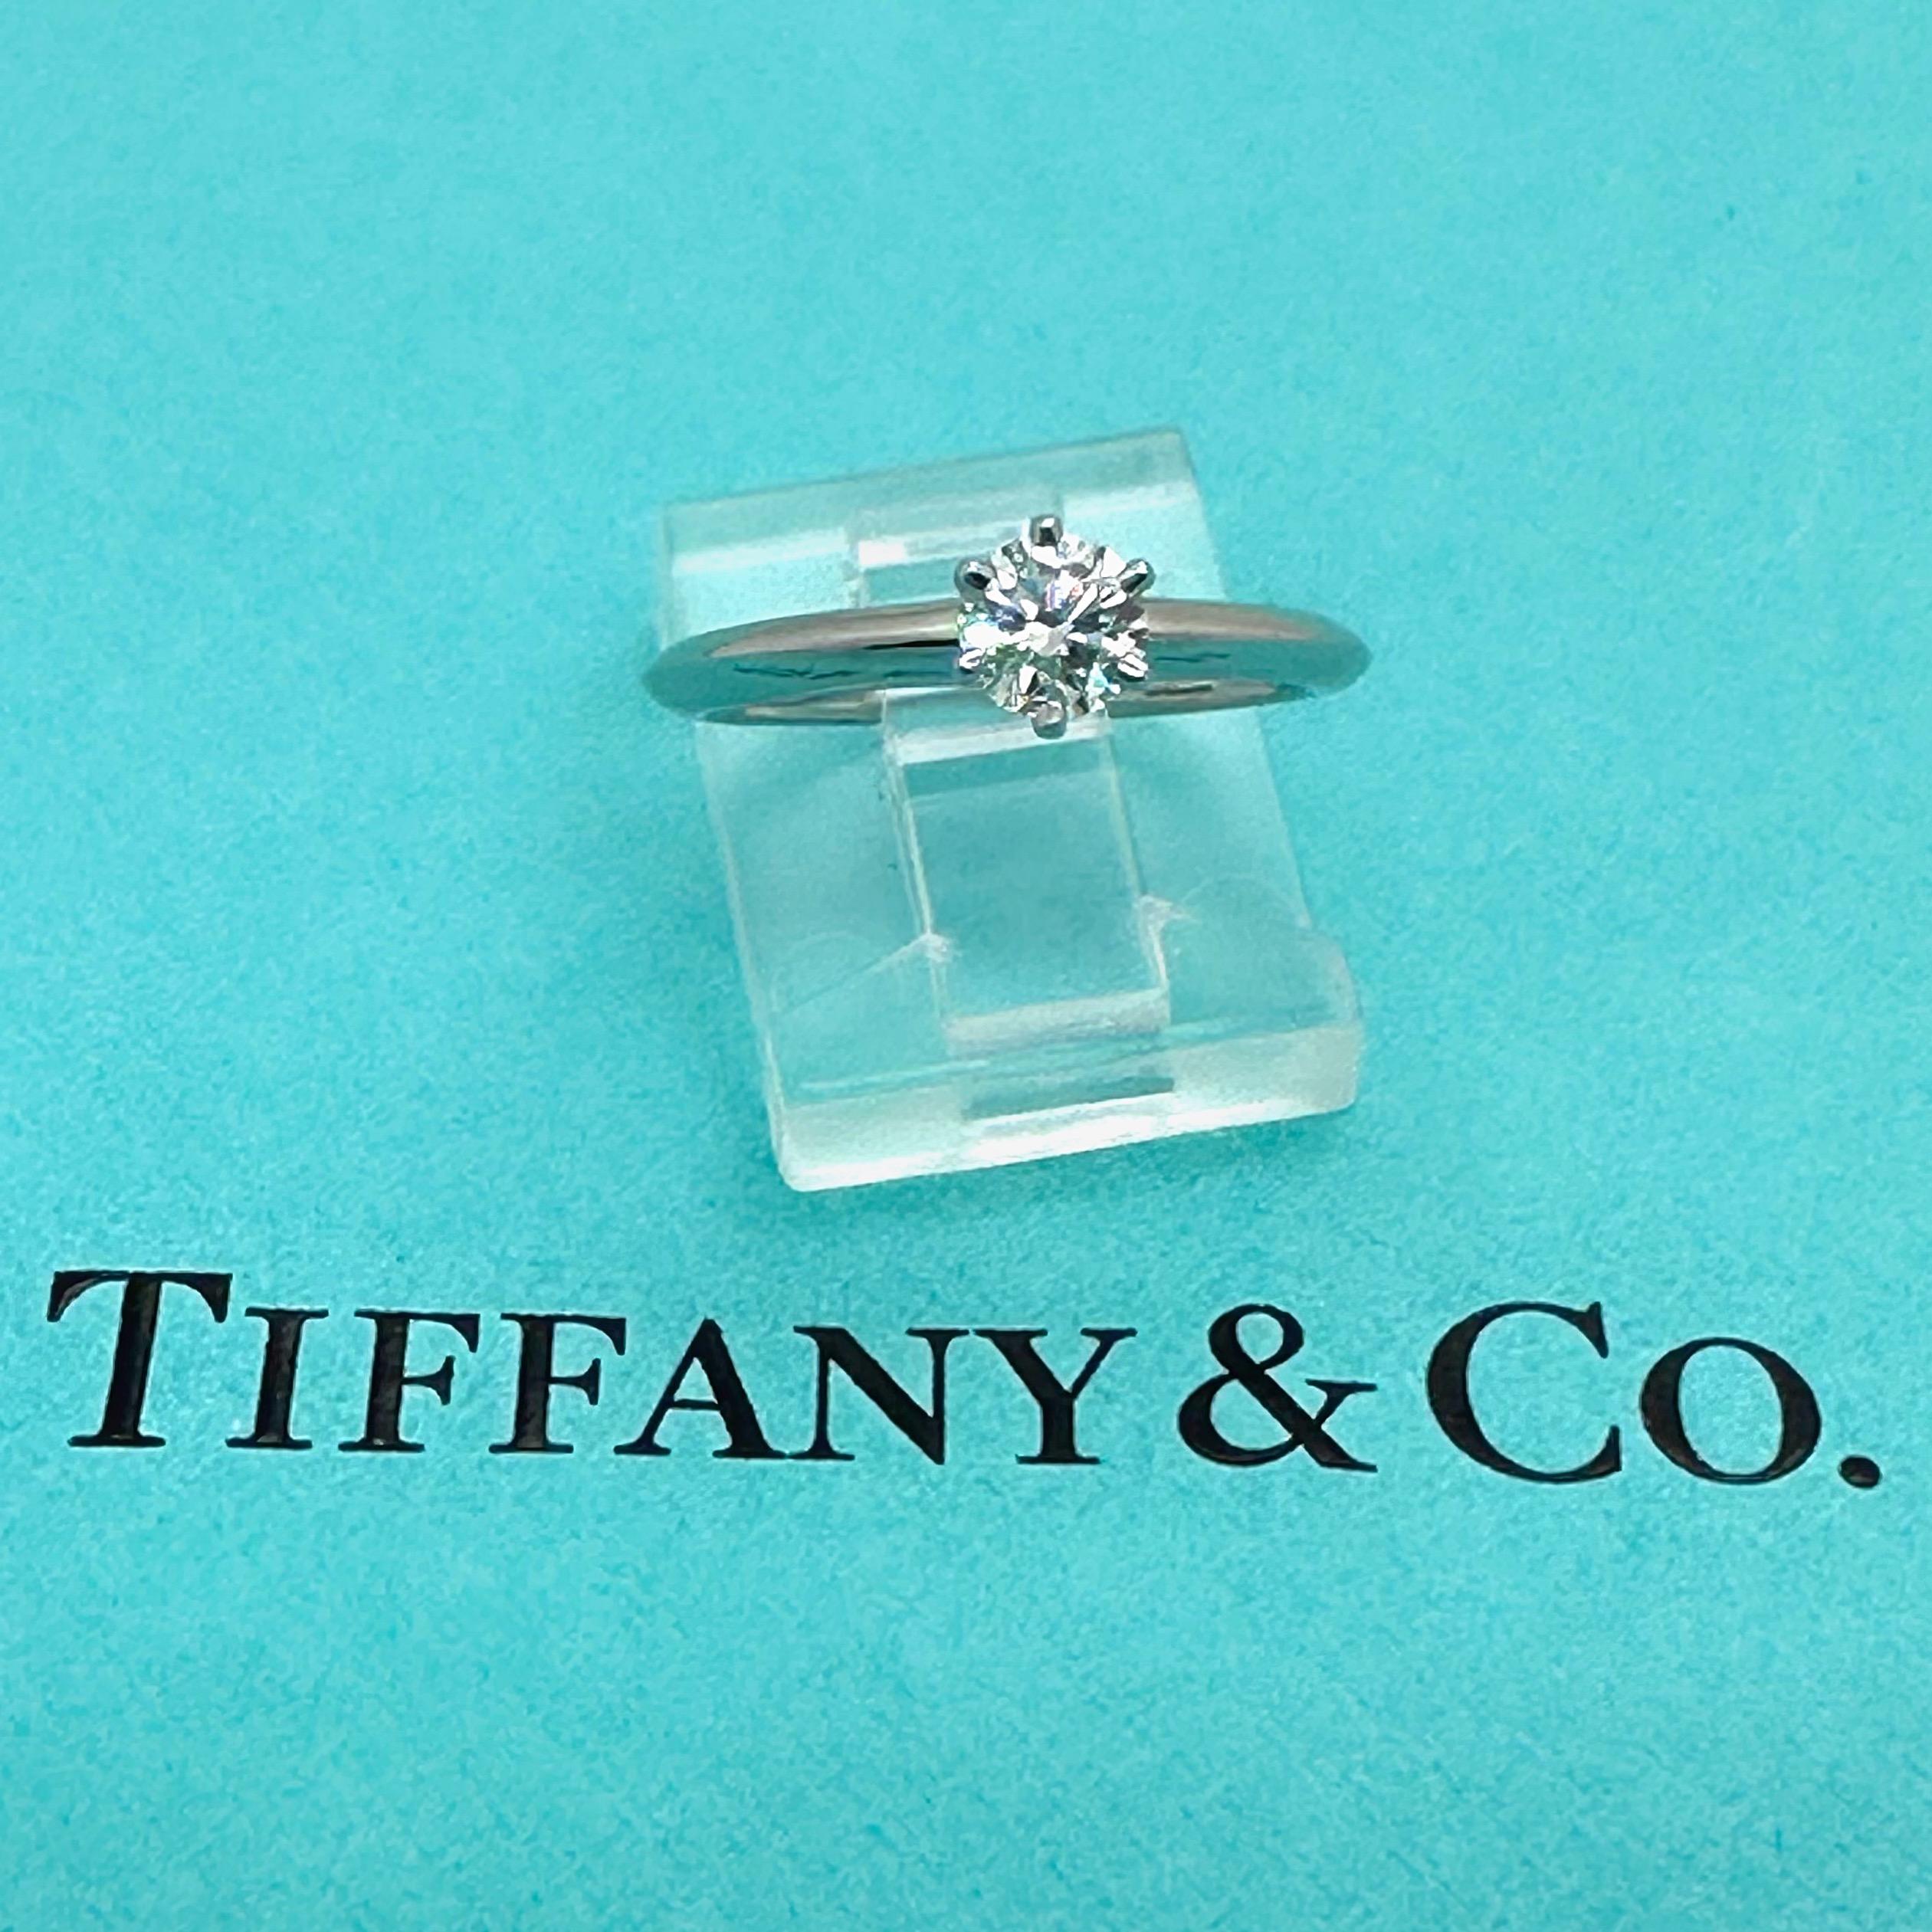 Tiffany & Co Round Brilliant Diamond 0.33 ct H VS1 Solitair Plat Engagement Ring For Sale 3